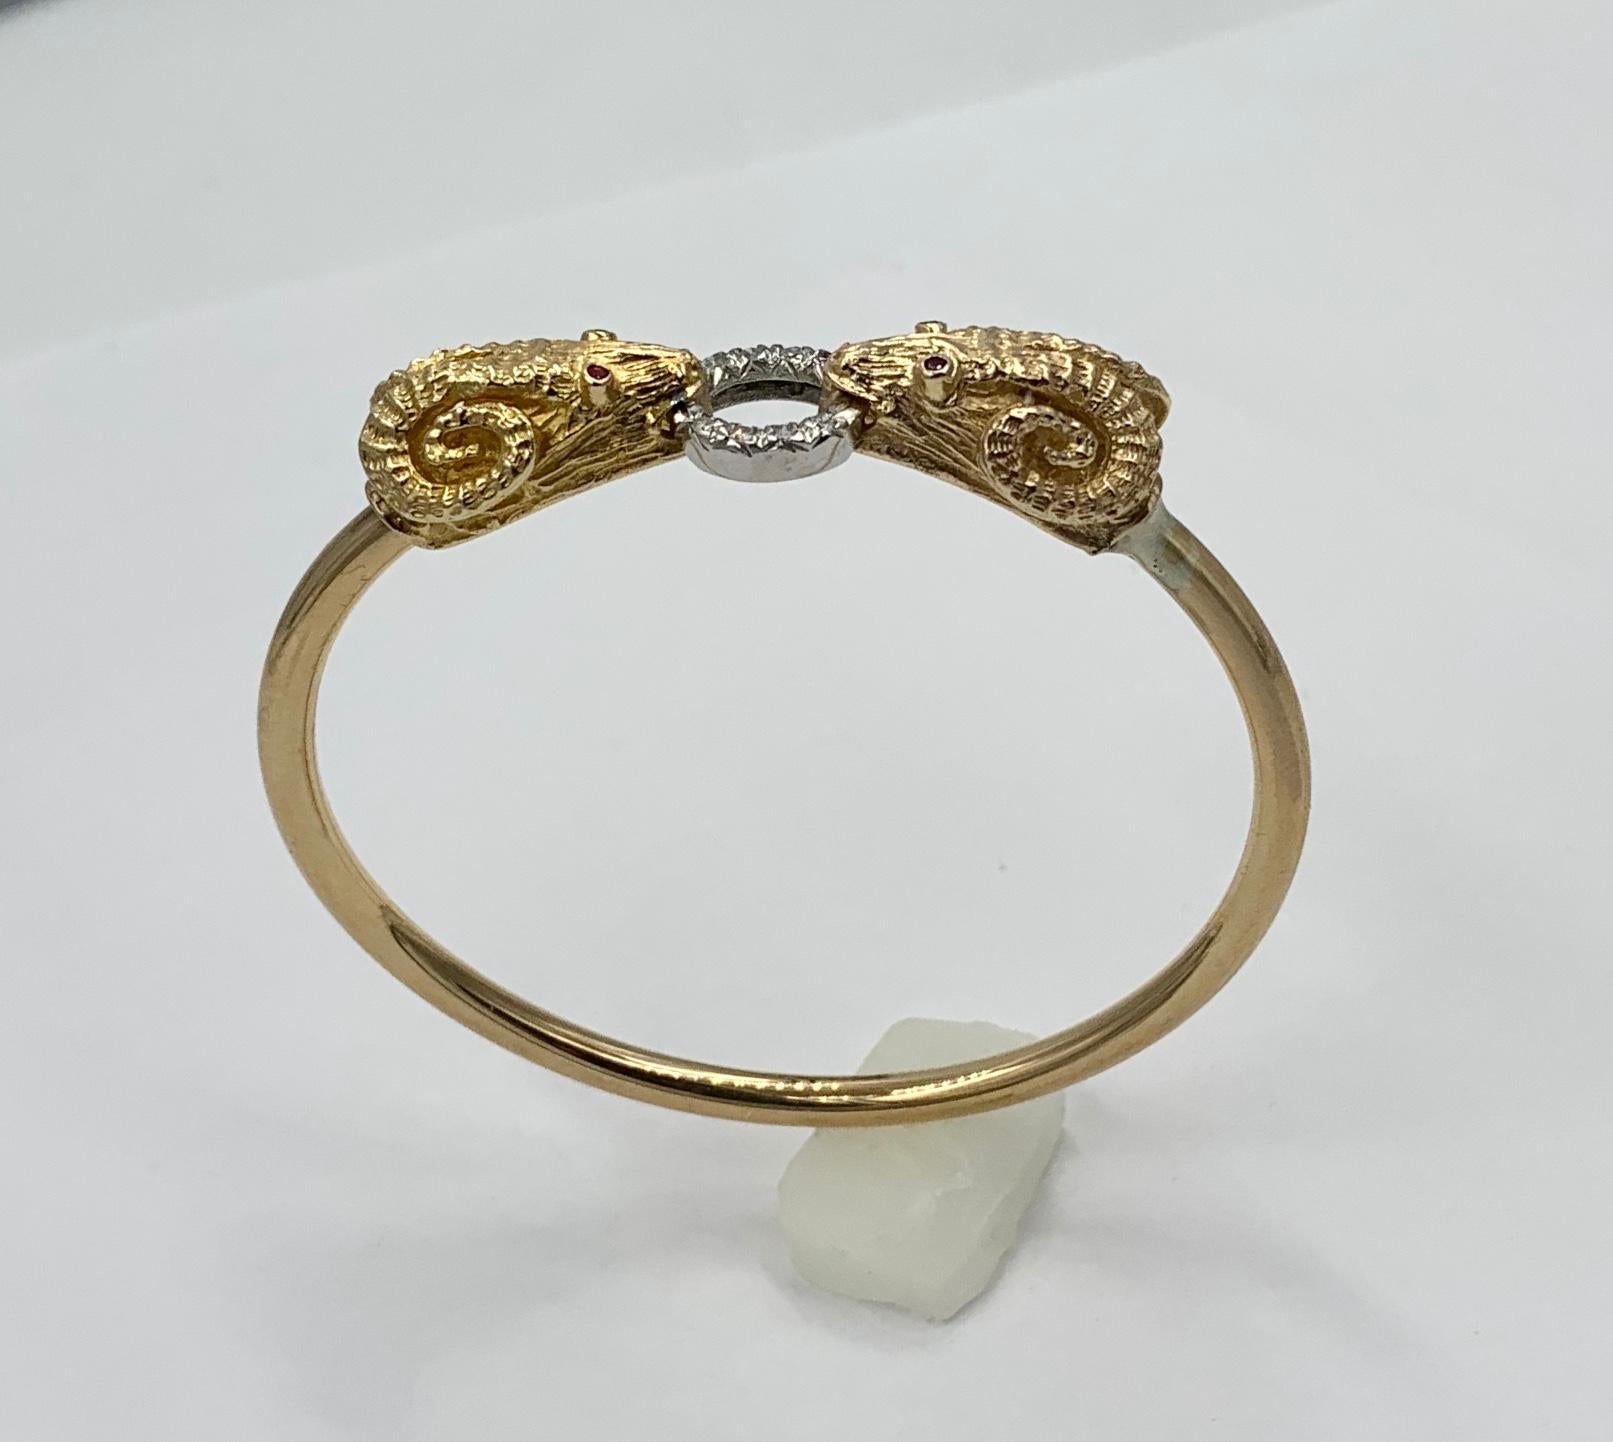 Ram Head Aries Bangle Bracelet Diamond Ruby 14 Karat Gold In Good Condition For Sale In New York, NY